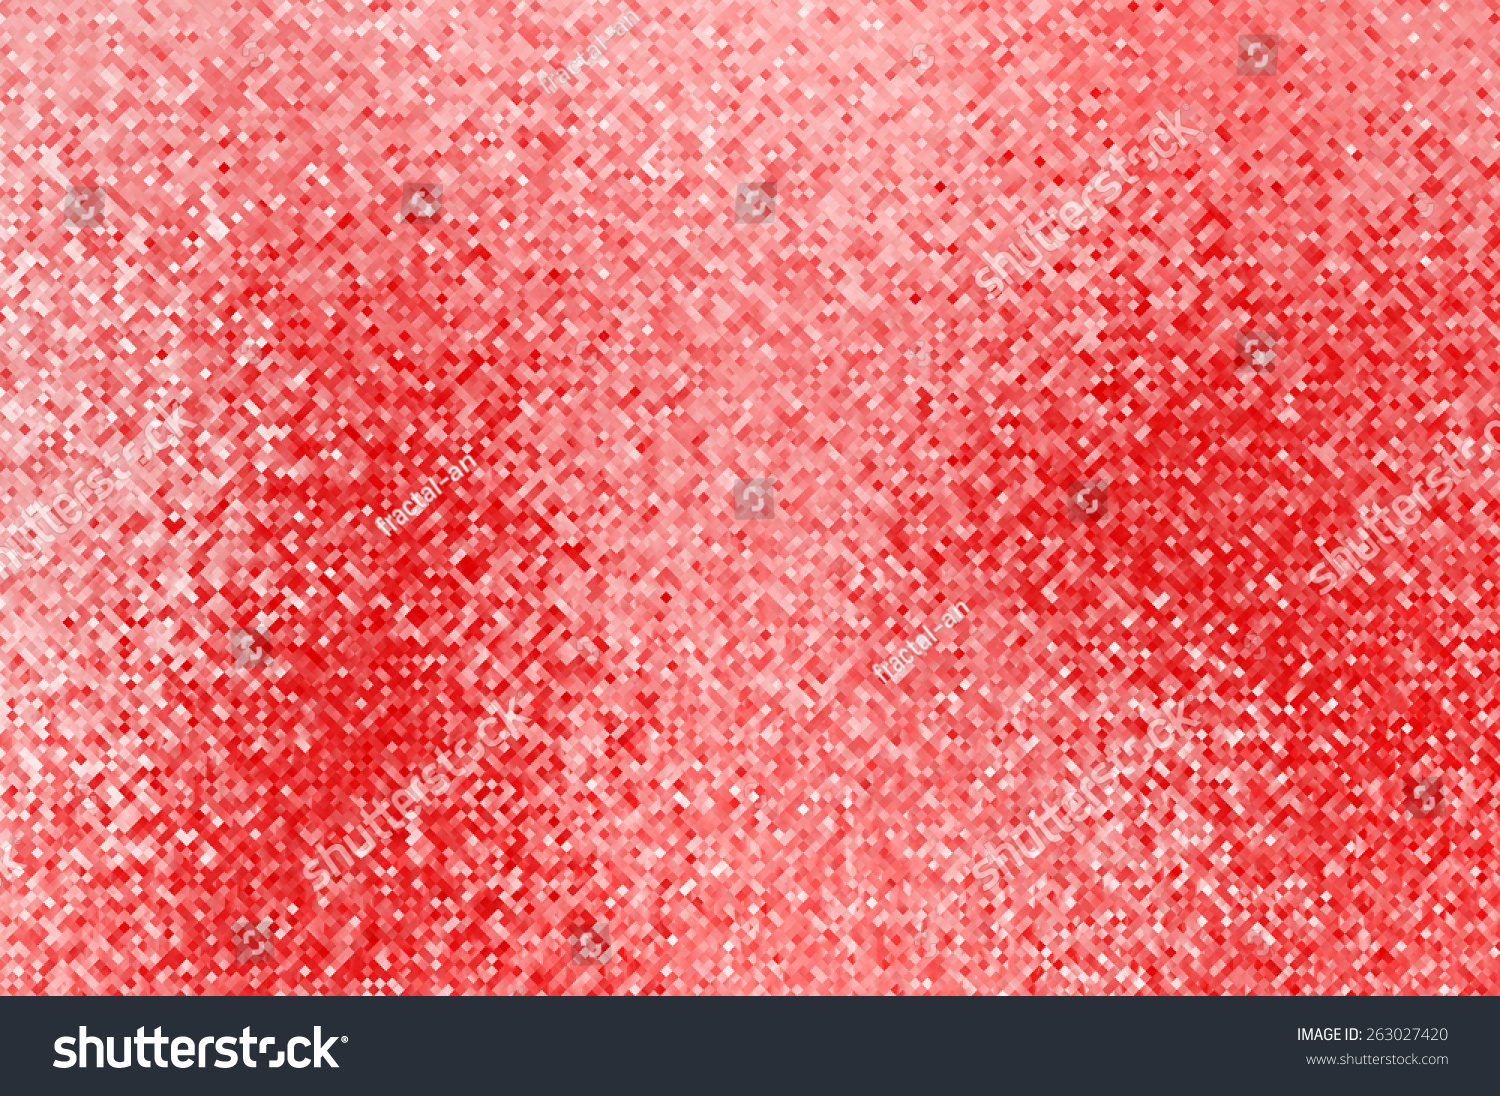 Abstract mosaic geometrical red background #263027420